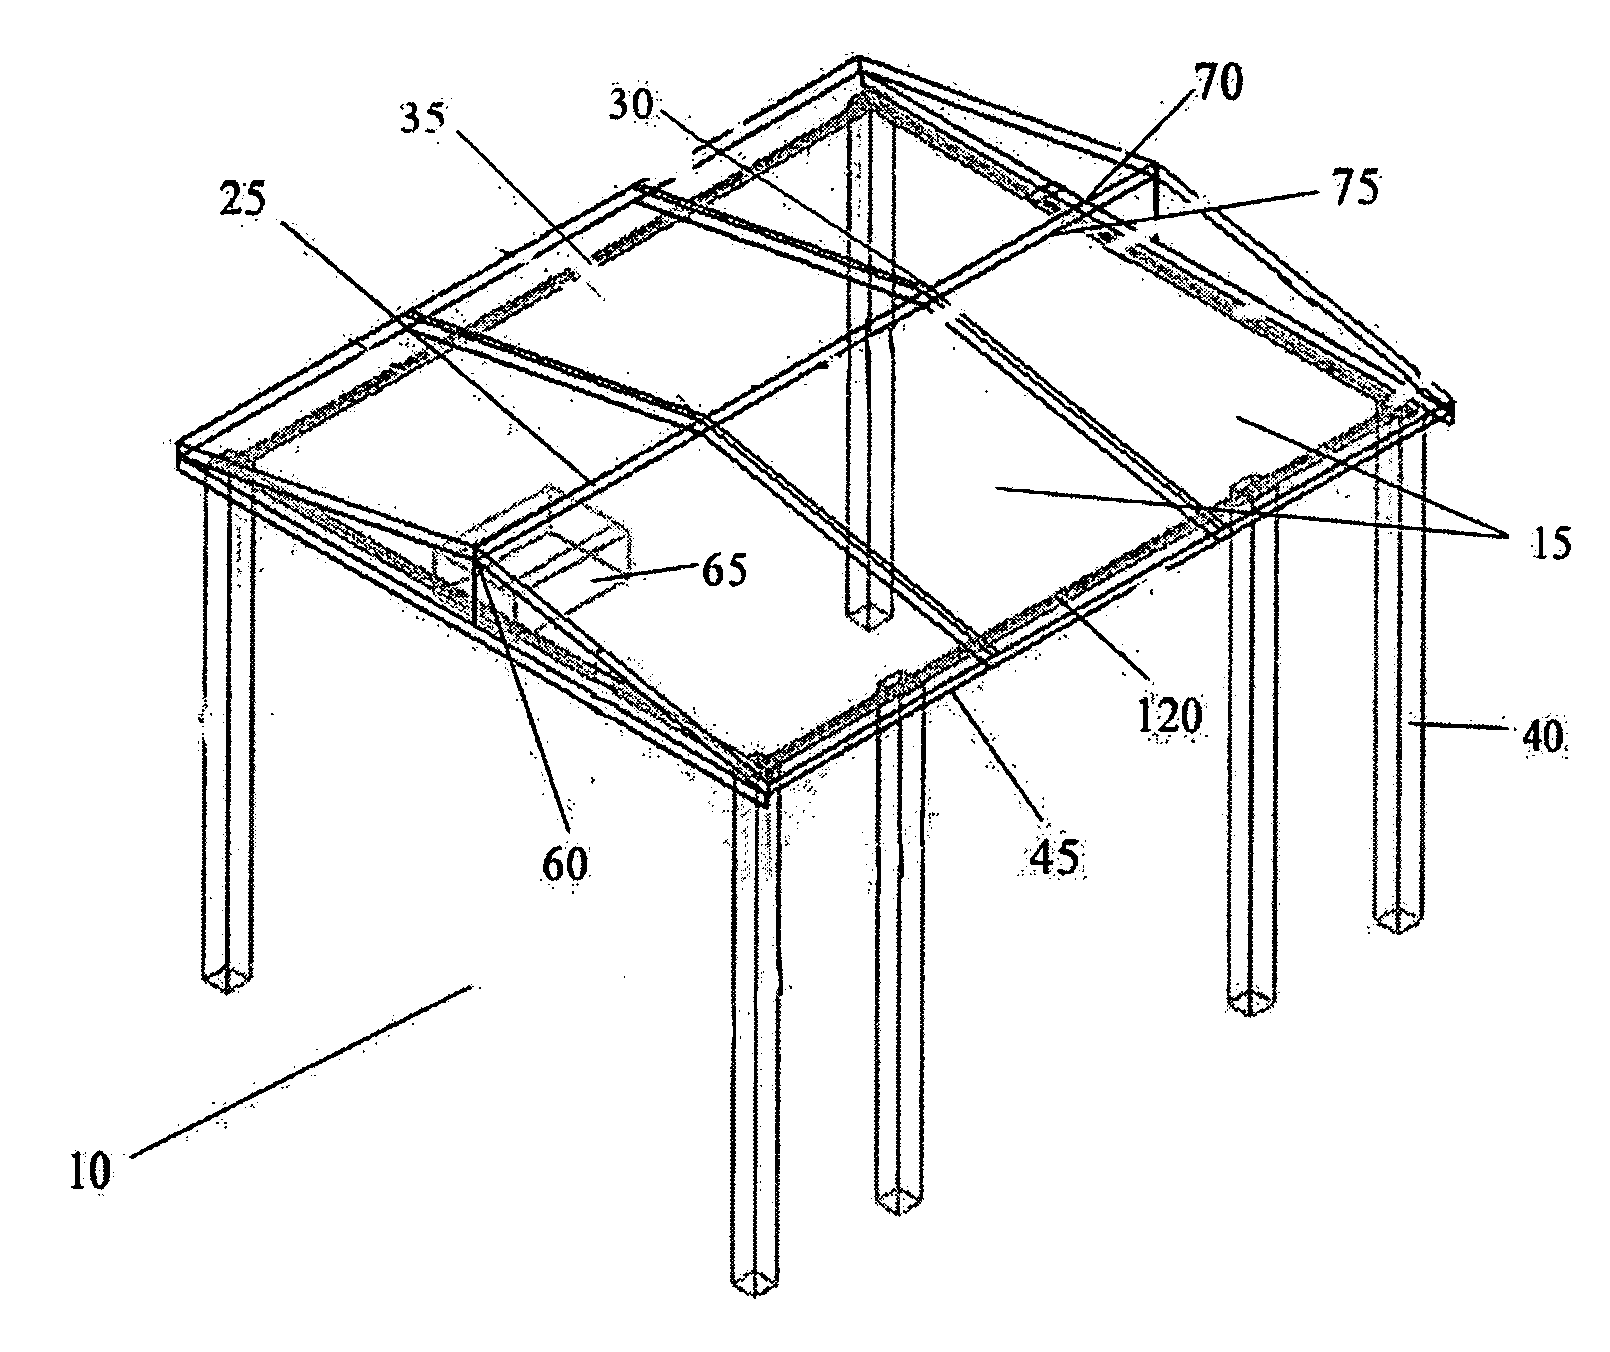 Easy-to-assemble building structure with a mountable frame for supporting solar panels